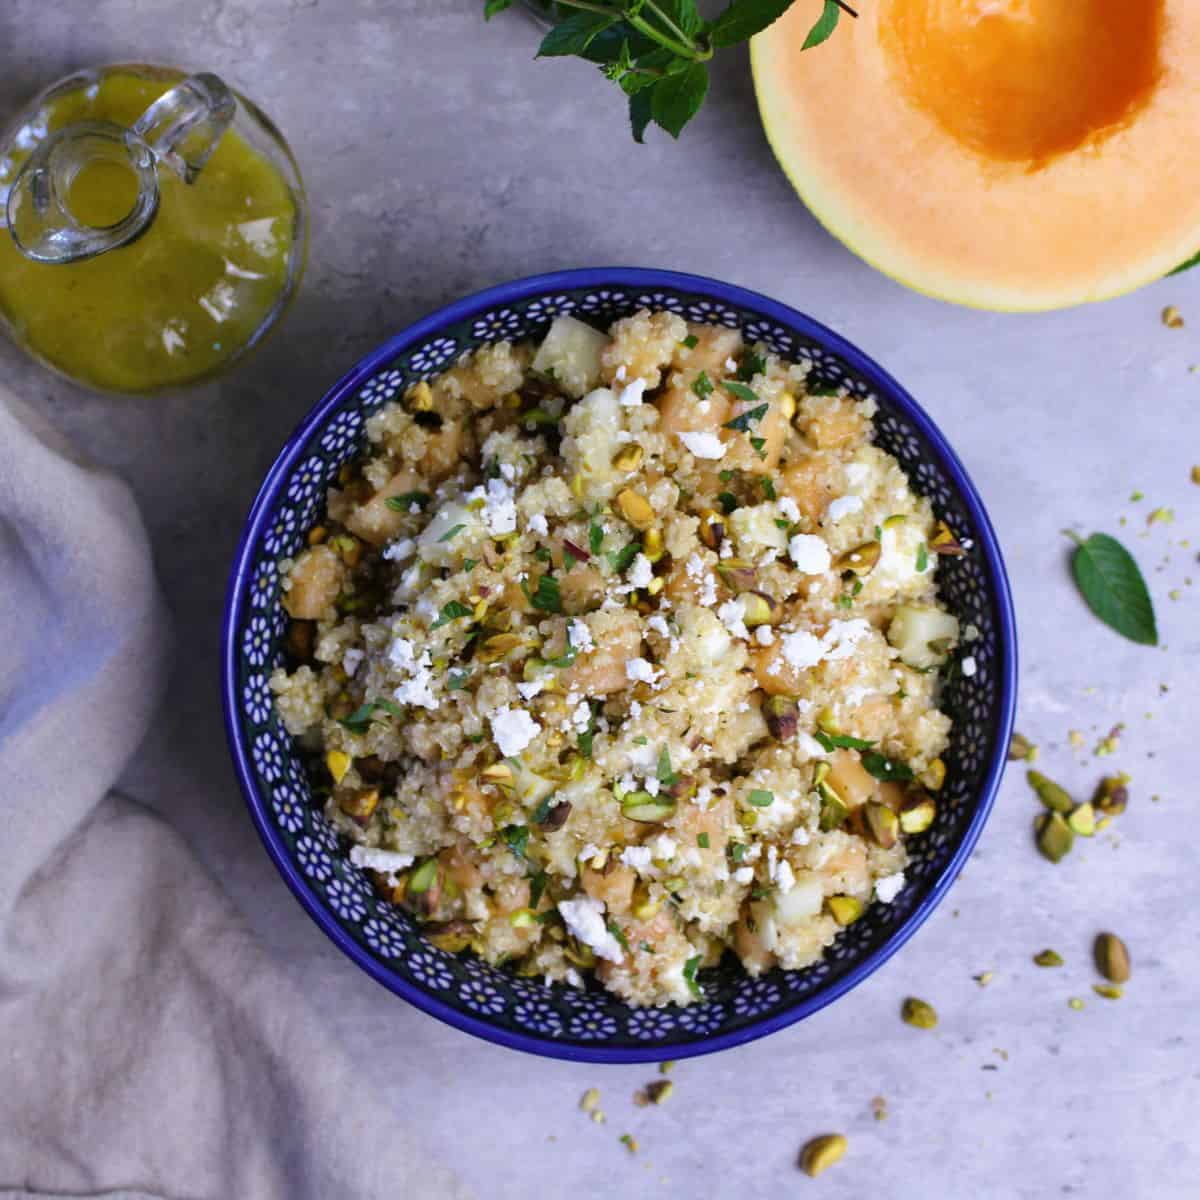 Featured image for “Cold Quinoa Salad with Cantaloupe and Goat Cheese”